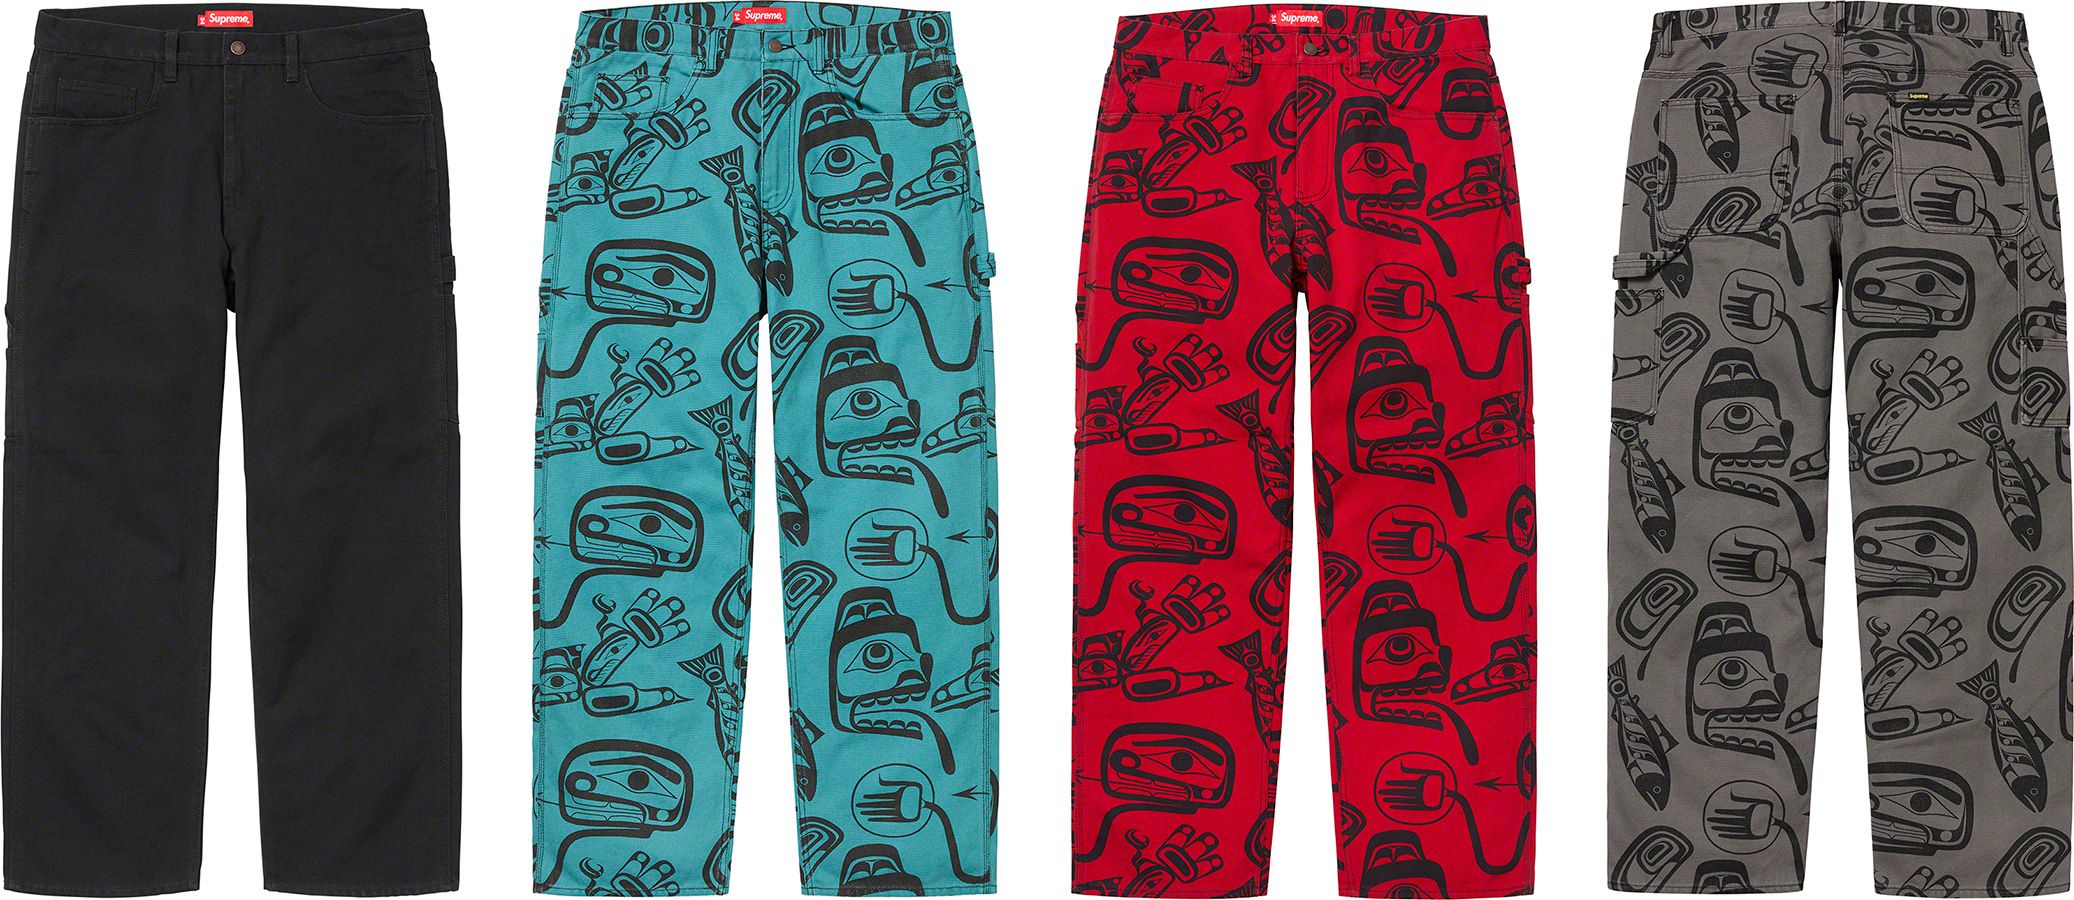 Supreme Is Love Skate Pant - Fall/Winter 2019 Preview – Supreme